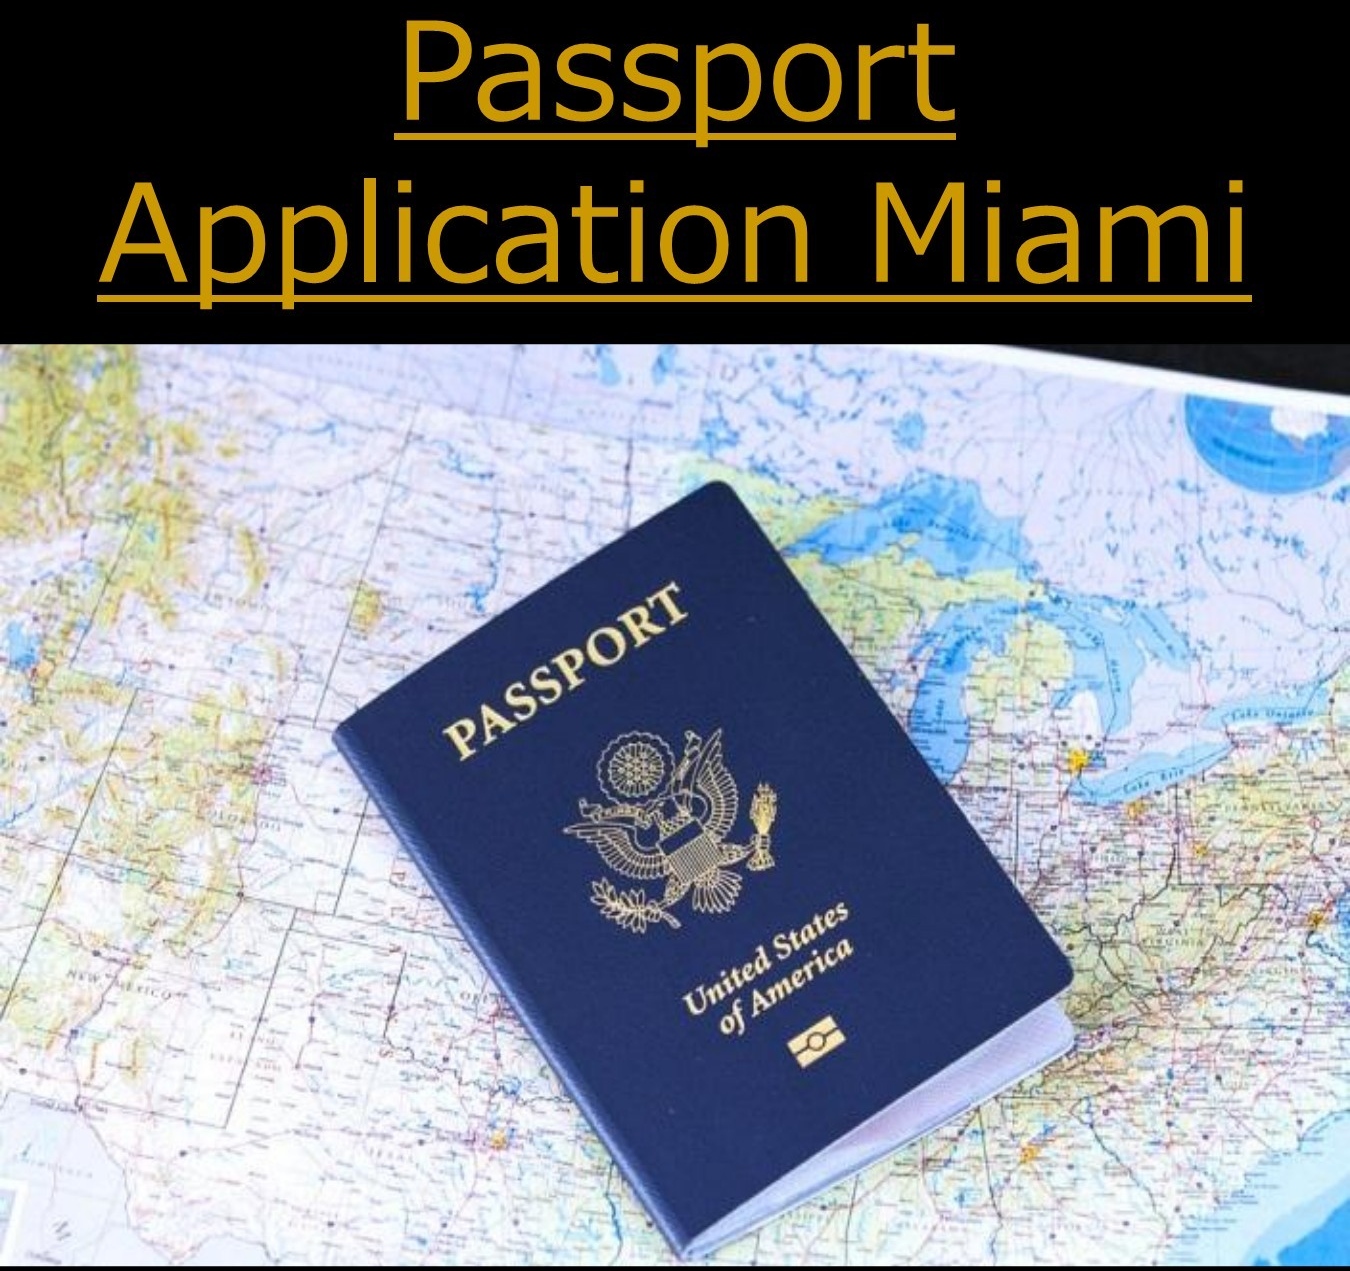 What is the Passport renewal process in Miami